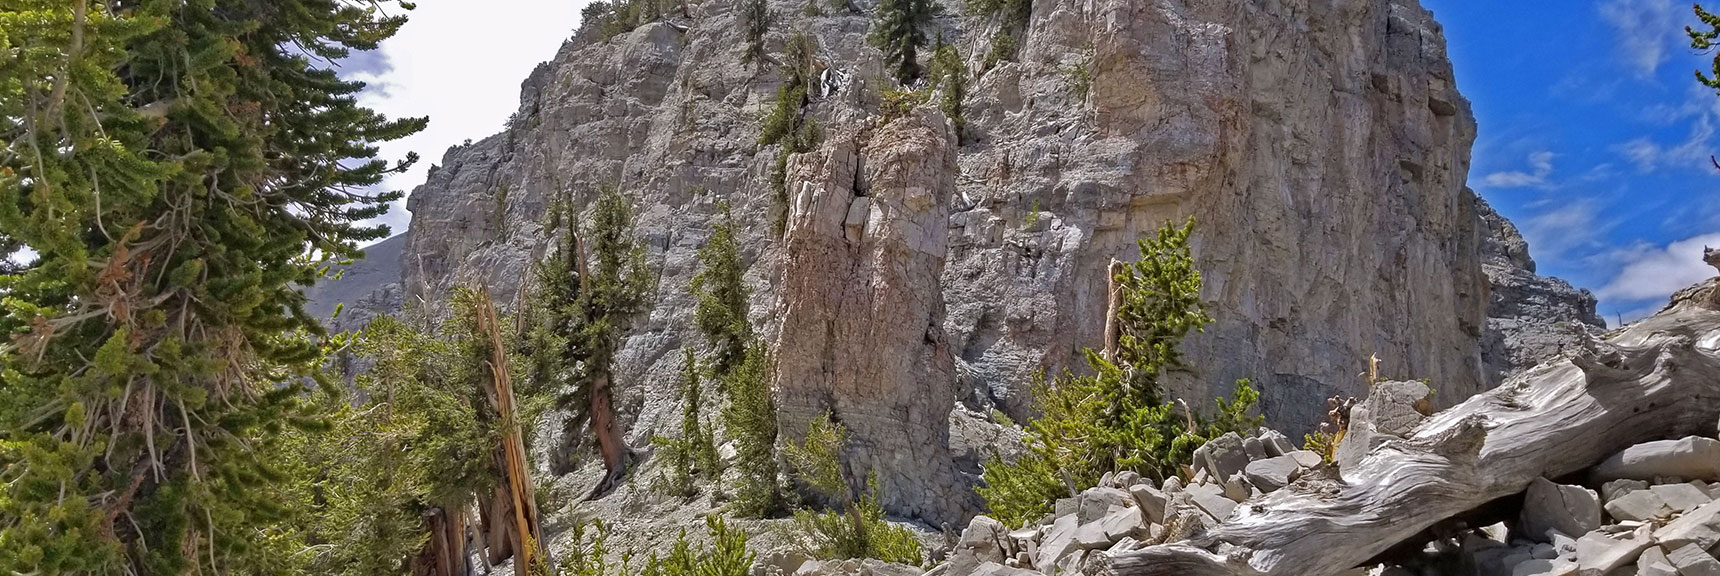 Entering the Cliff and Bristlecone Pine Area at the Base of Charleston Peak | Lee and Charleston Peaks via Lee Canyon Mid Ridge | Mt Charleston Wilderness | Spring Mountains, Nevada